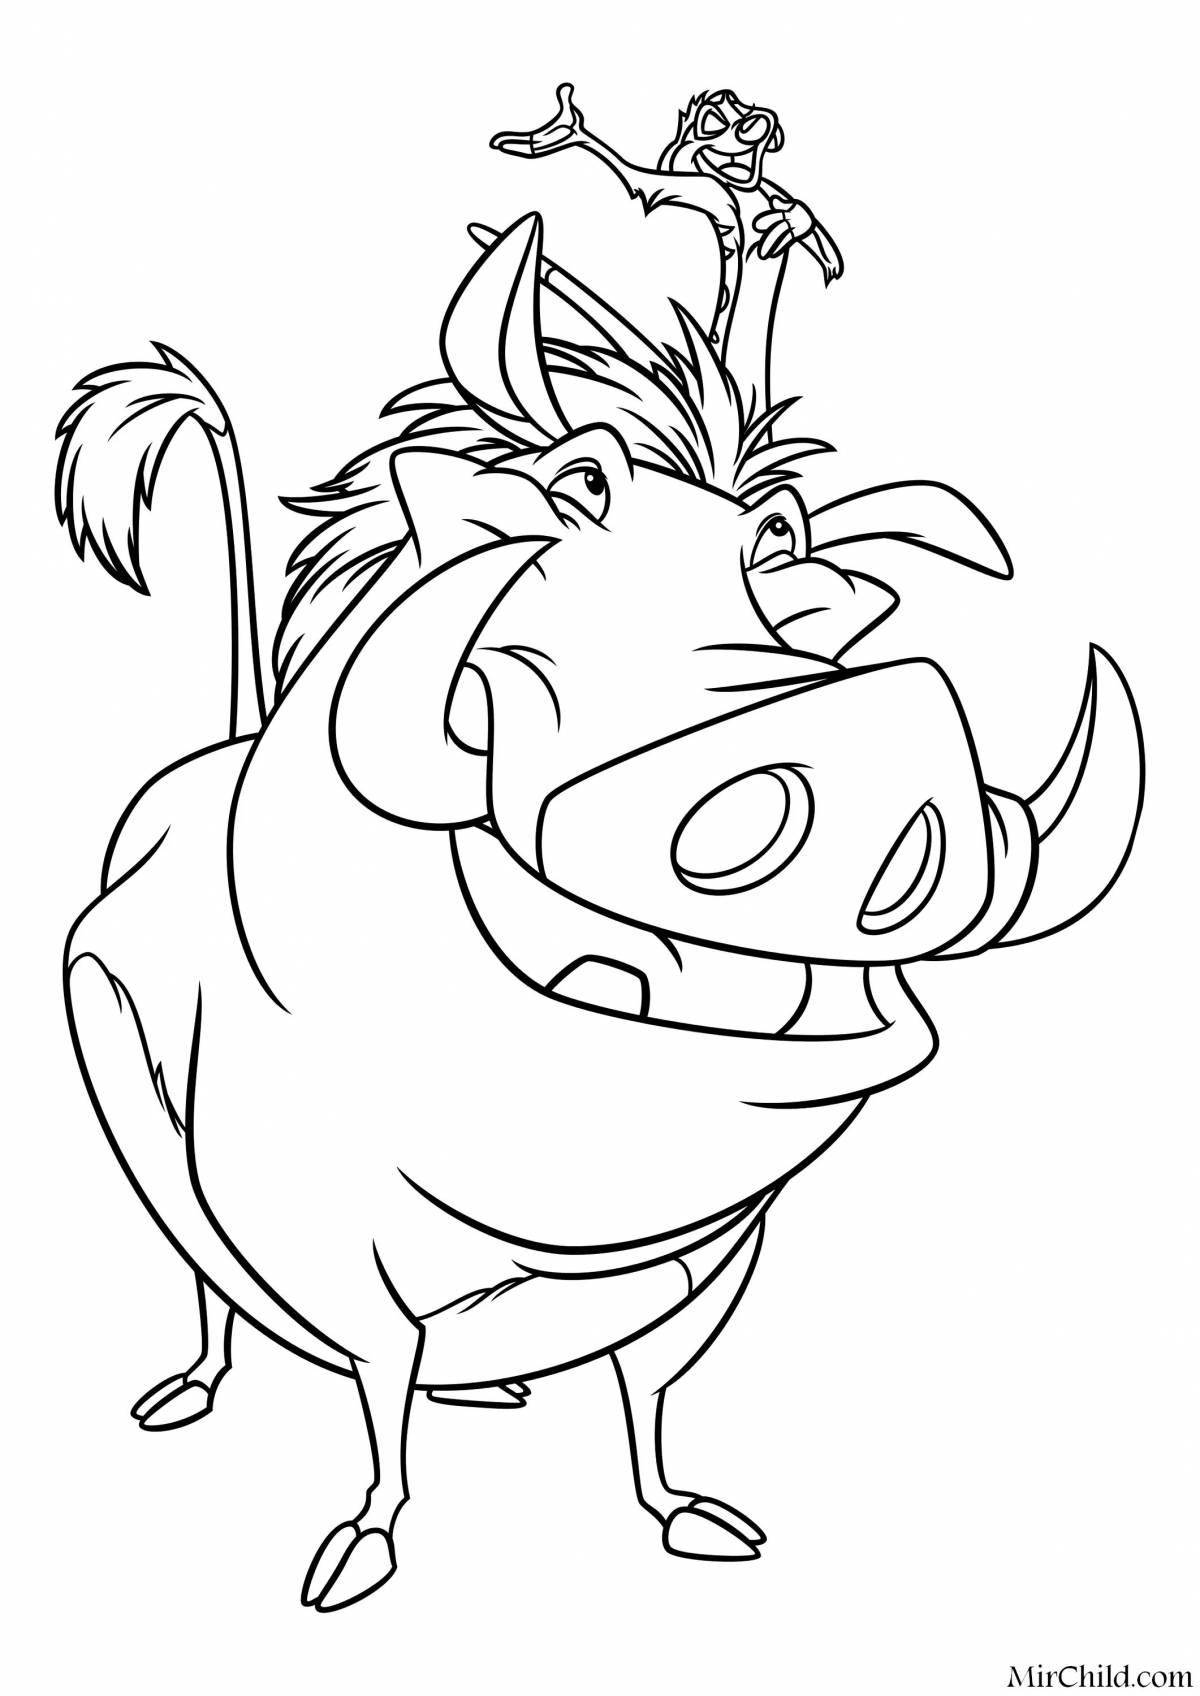 Pumba live coloring page